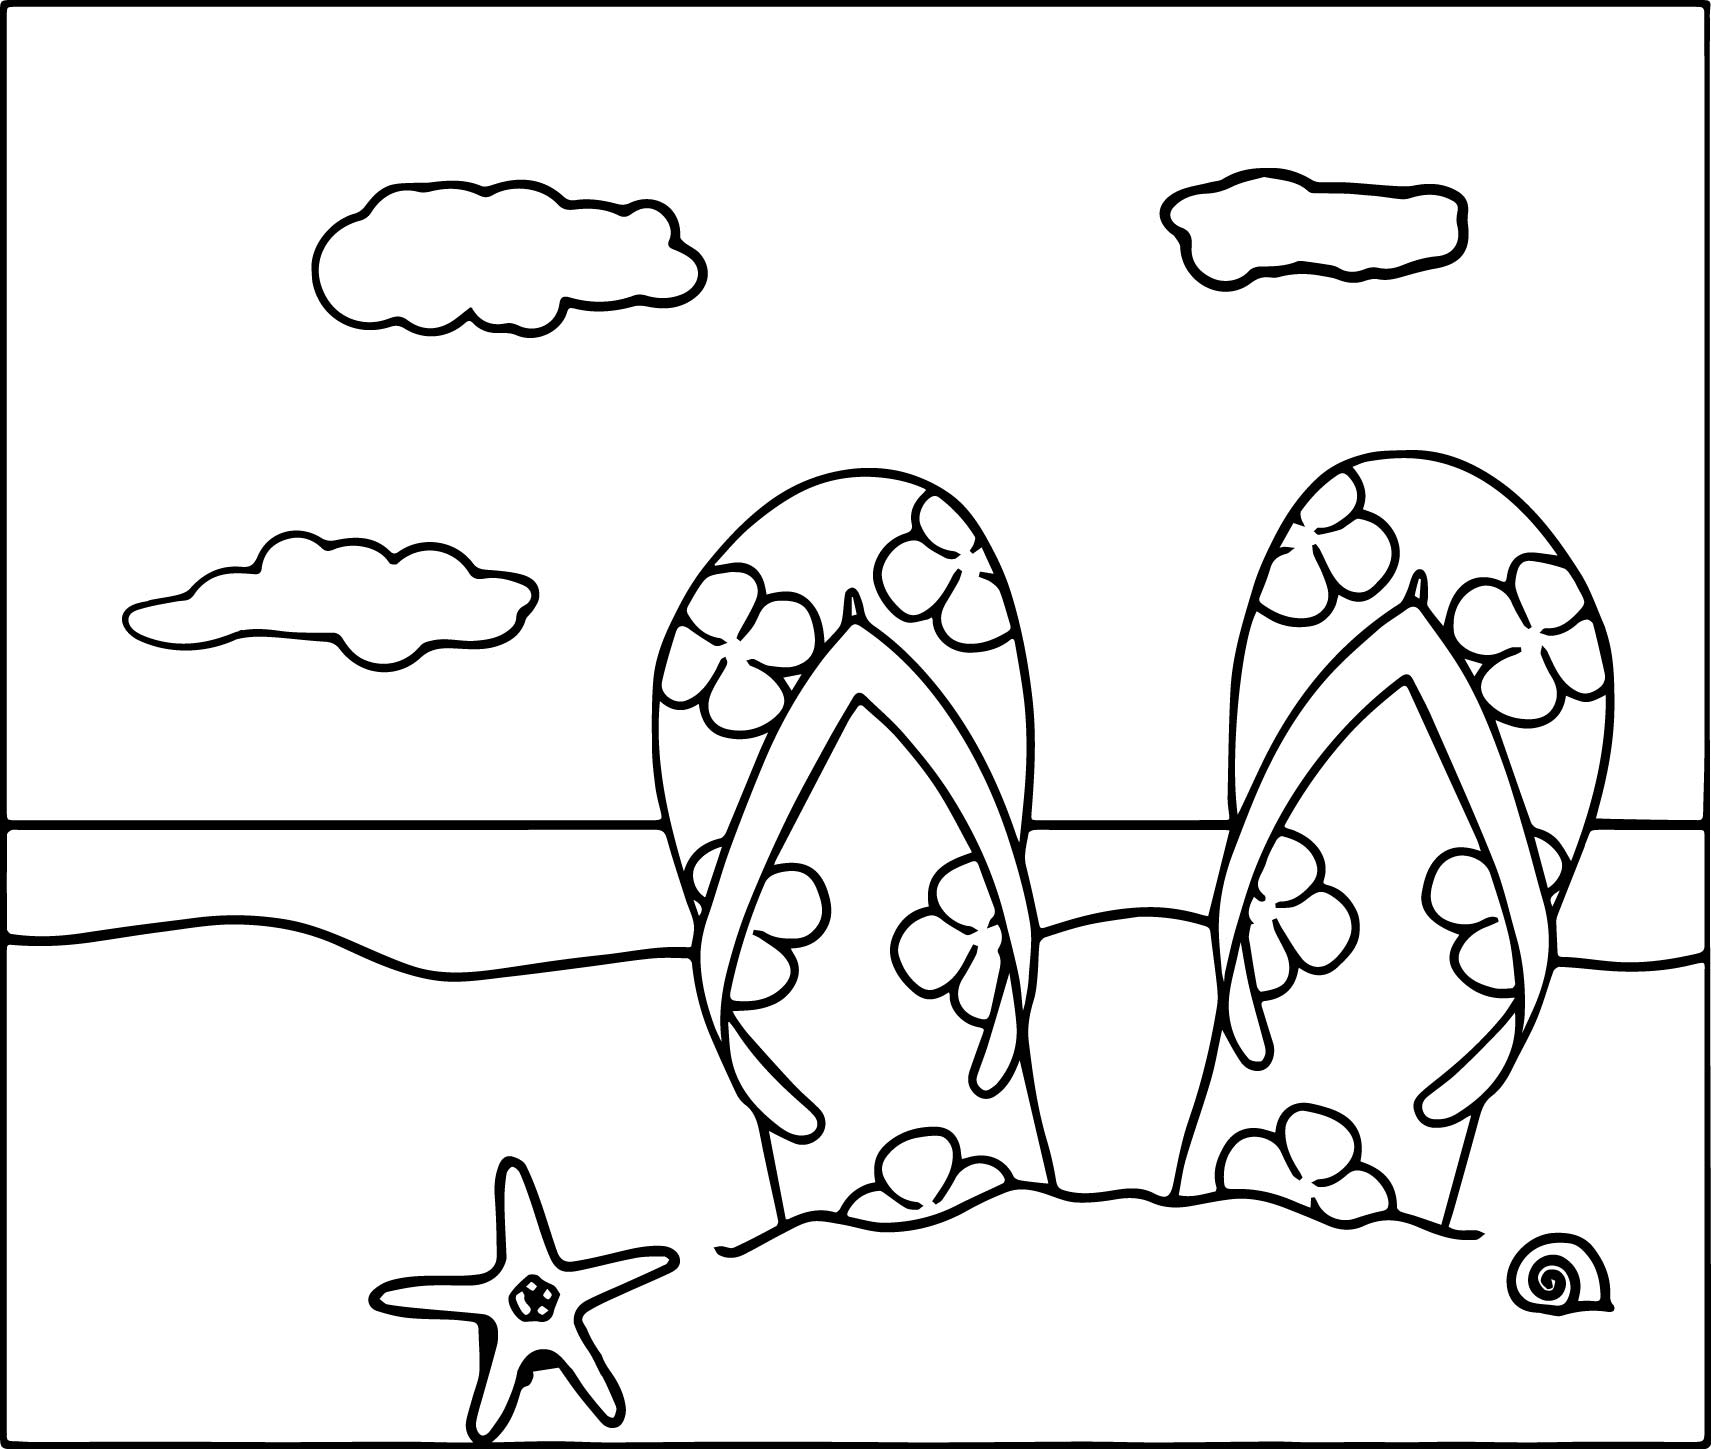 beach coloring page tropical beach coloring page free printable coloring pages beach coloring page 